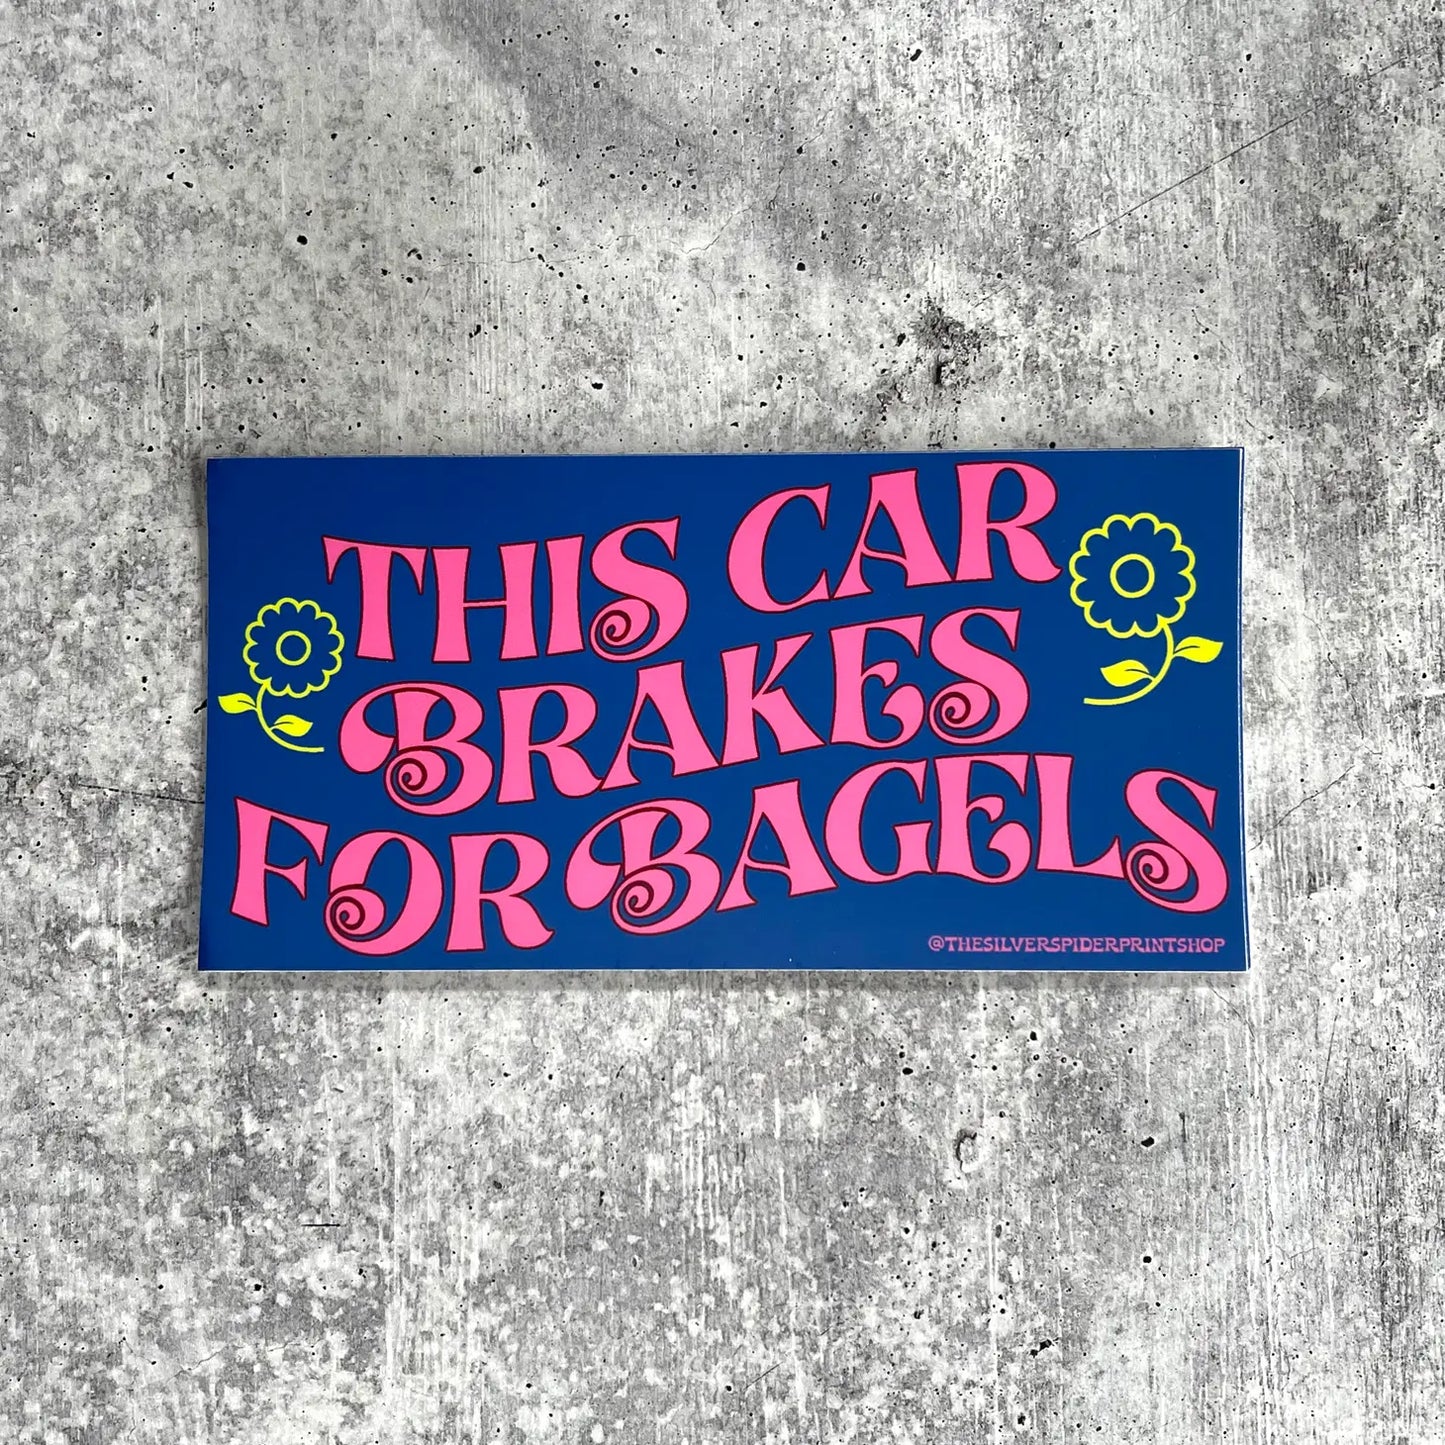 Load image into Gallery viewer, This Car Brakes For Bagels Bumper Sticker
